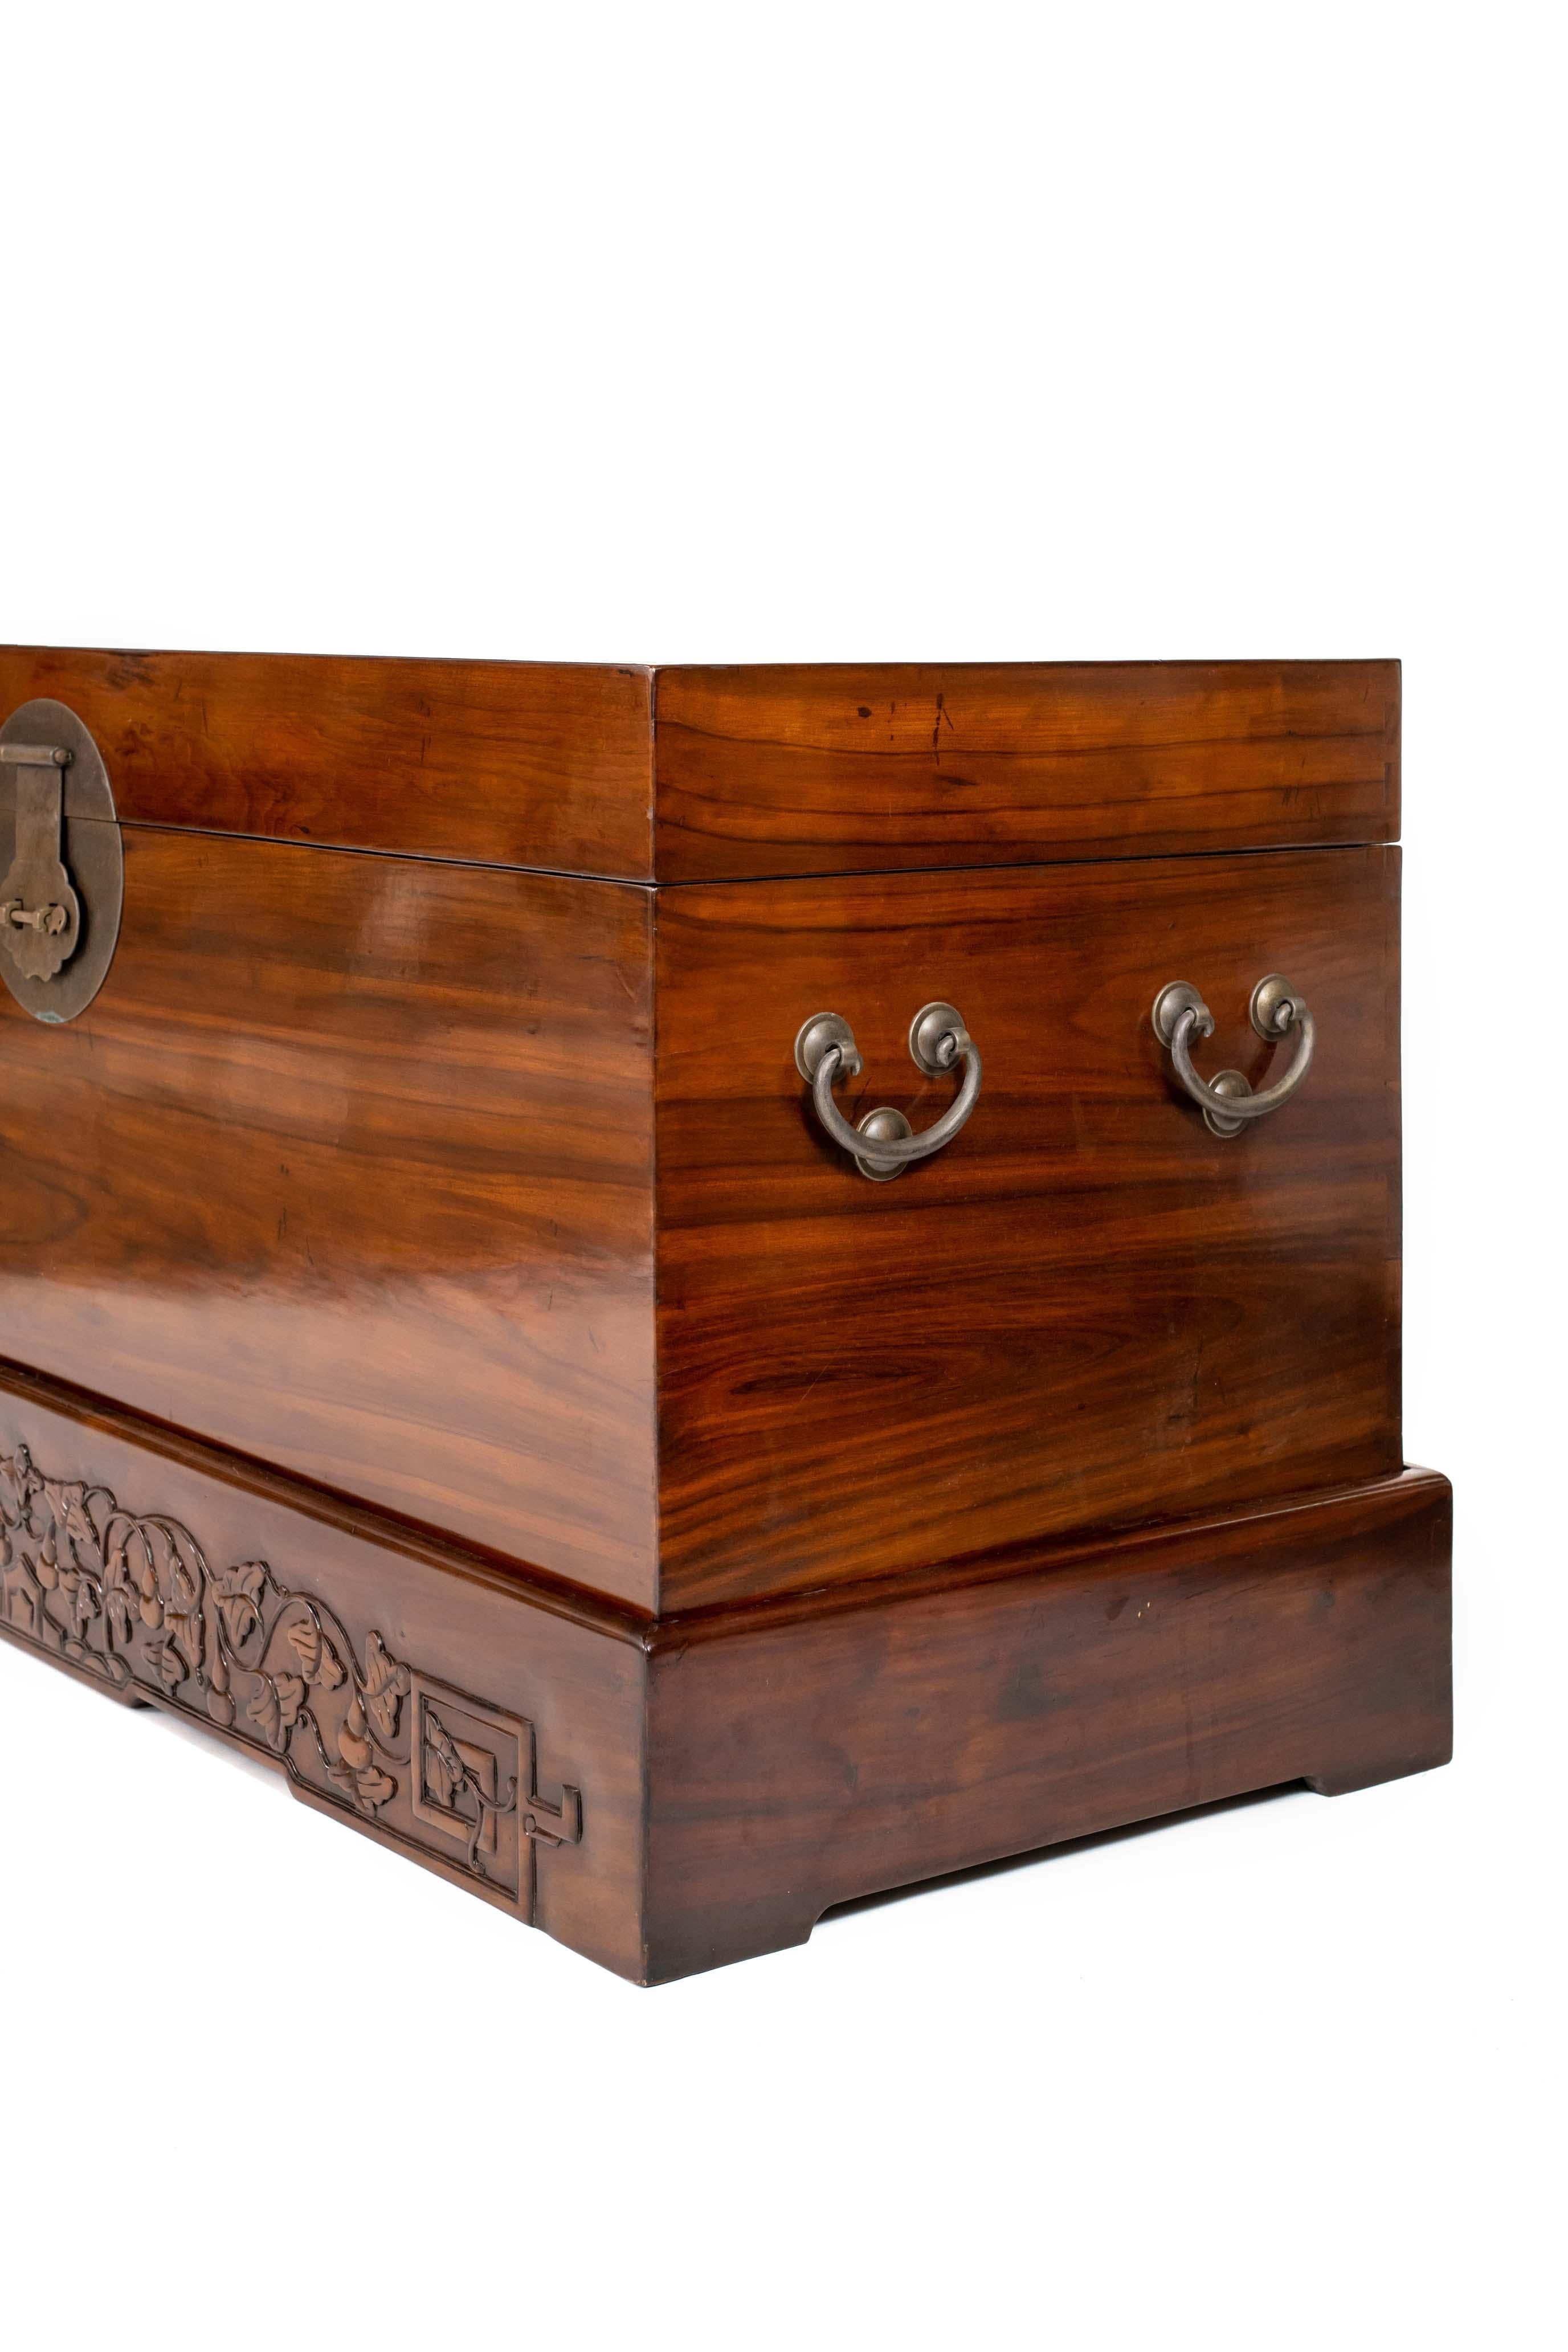 Hand-Carved Antique Chinese Large Camphor Fur Chest on a Base with Hidden Wooden Rollers For Sale